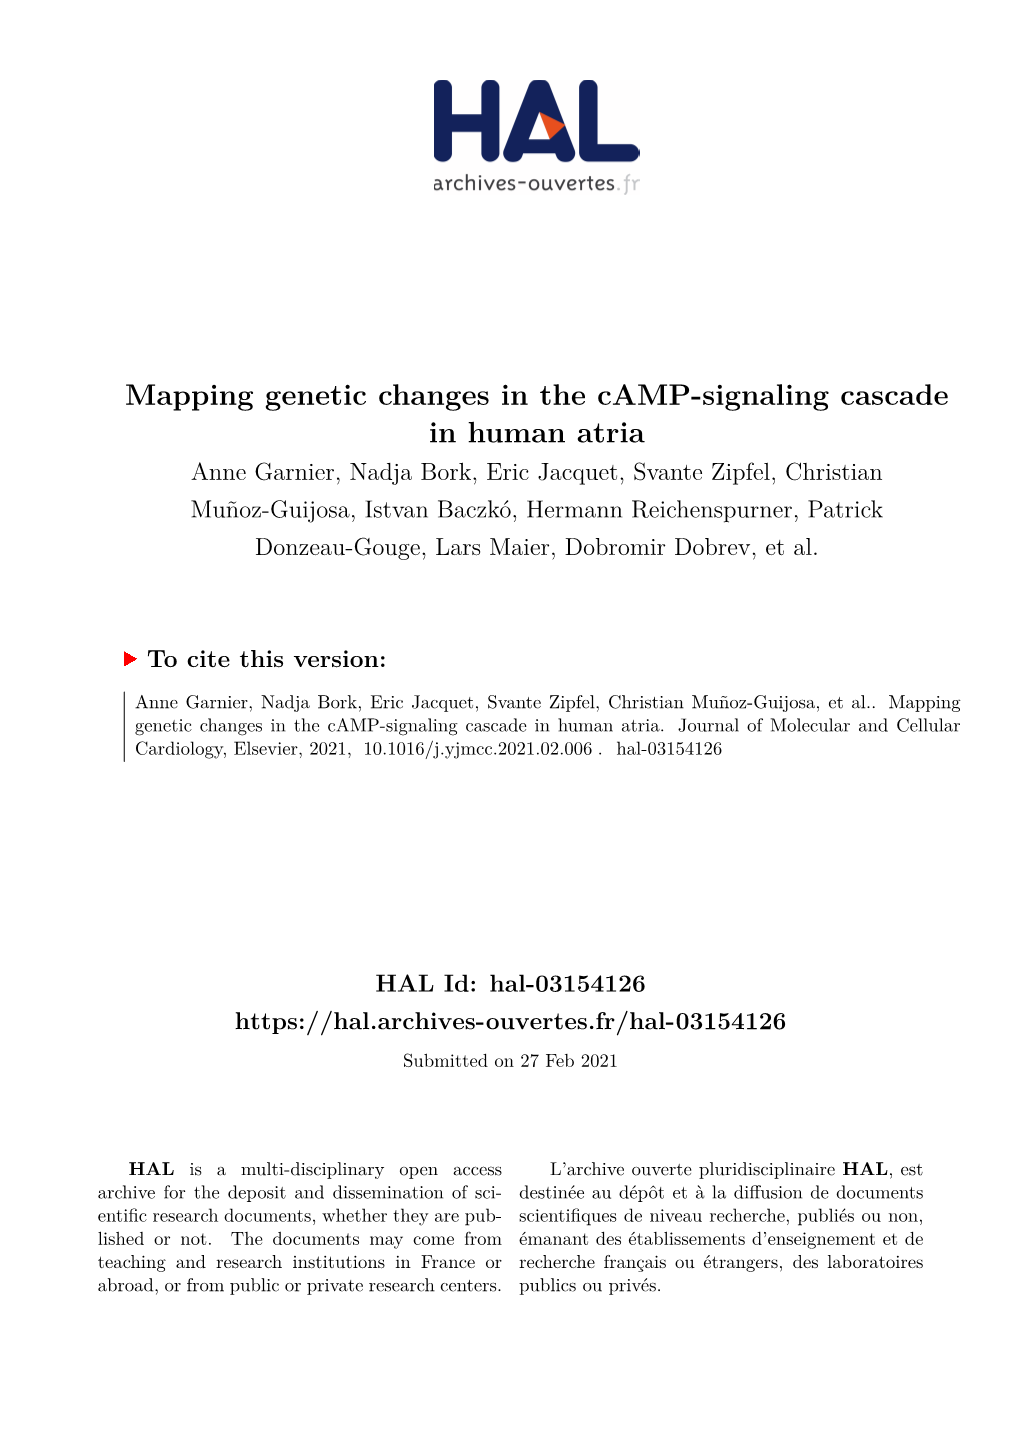 Mapping Genetic Changes in the Camp-Signaling Cascade in Human Atria